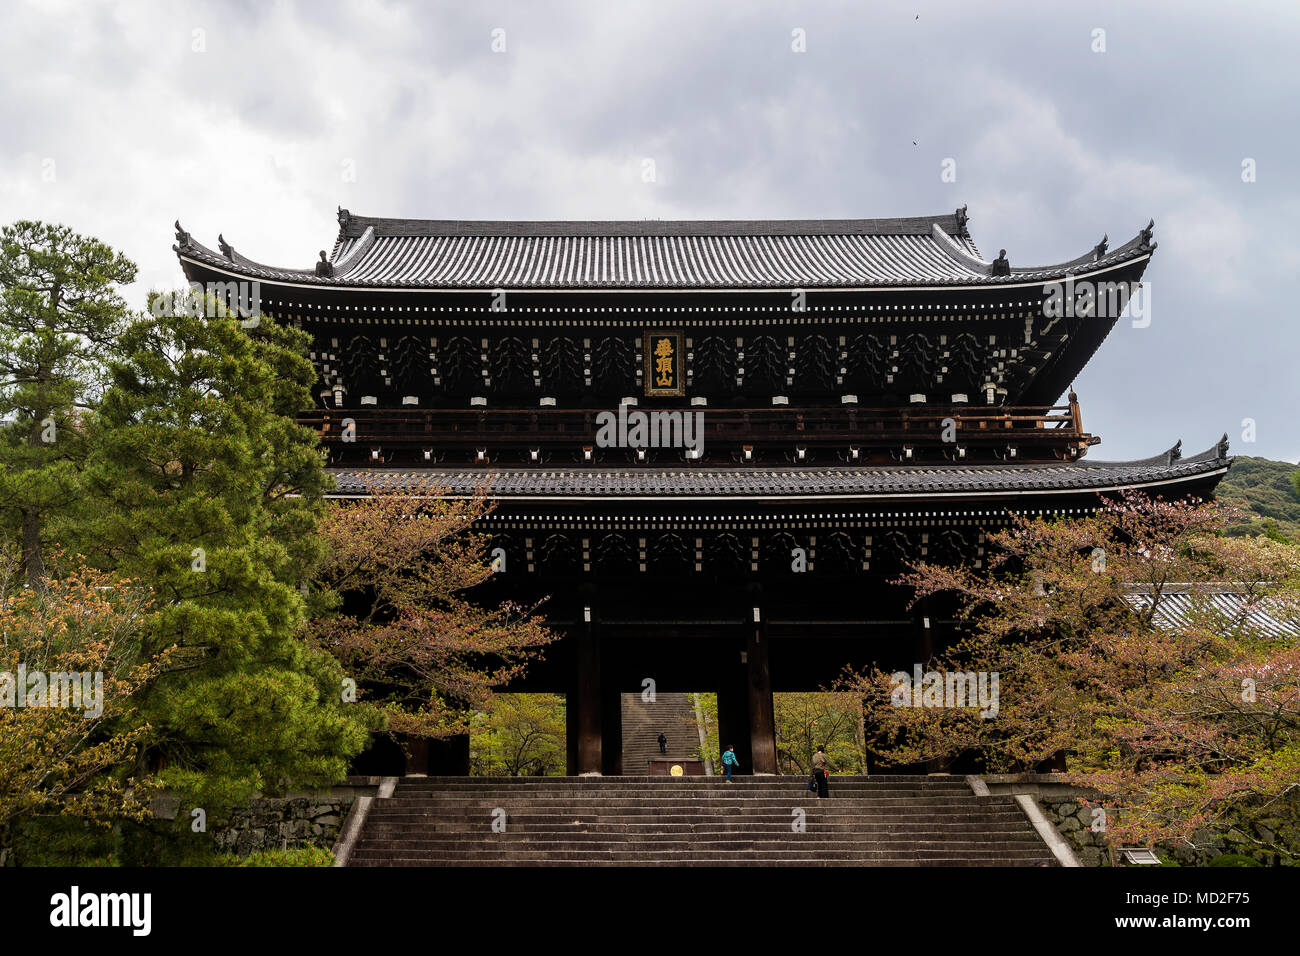 The Sanmon, colossal main gate entrance to the Chion-in Temple in Kyoto, Japan Stock Photo